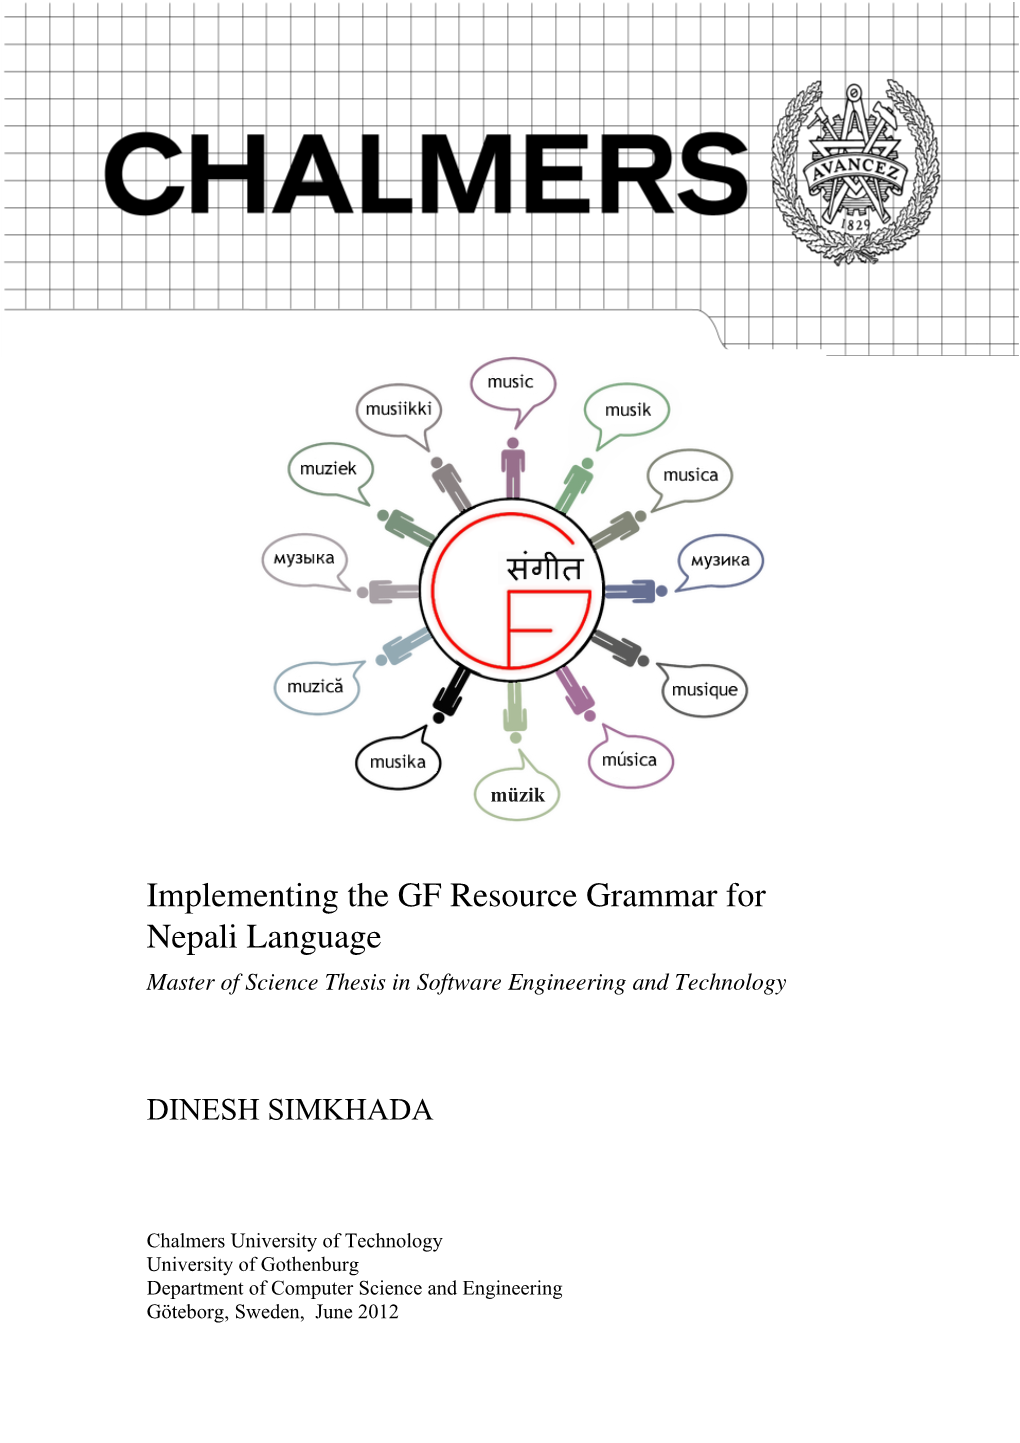 Implementing the GF Resource Grammar for Nepali Language Master of Science Thesis in Software Engineering and Technology